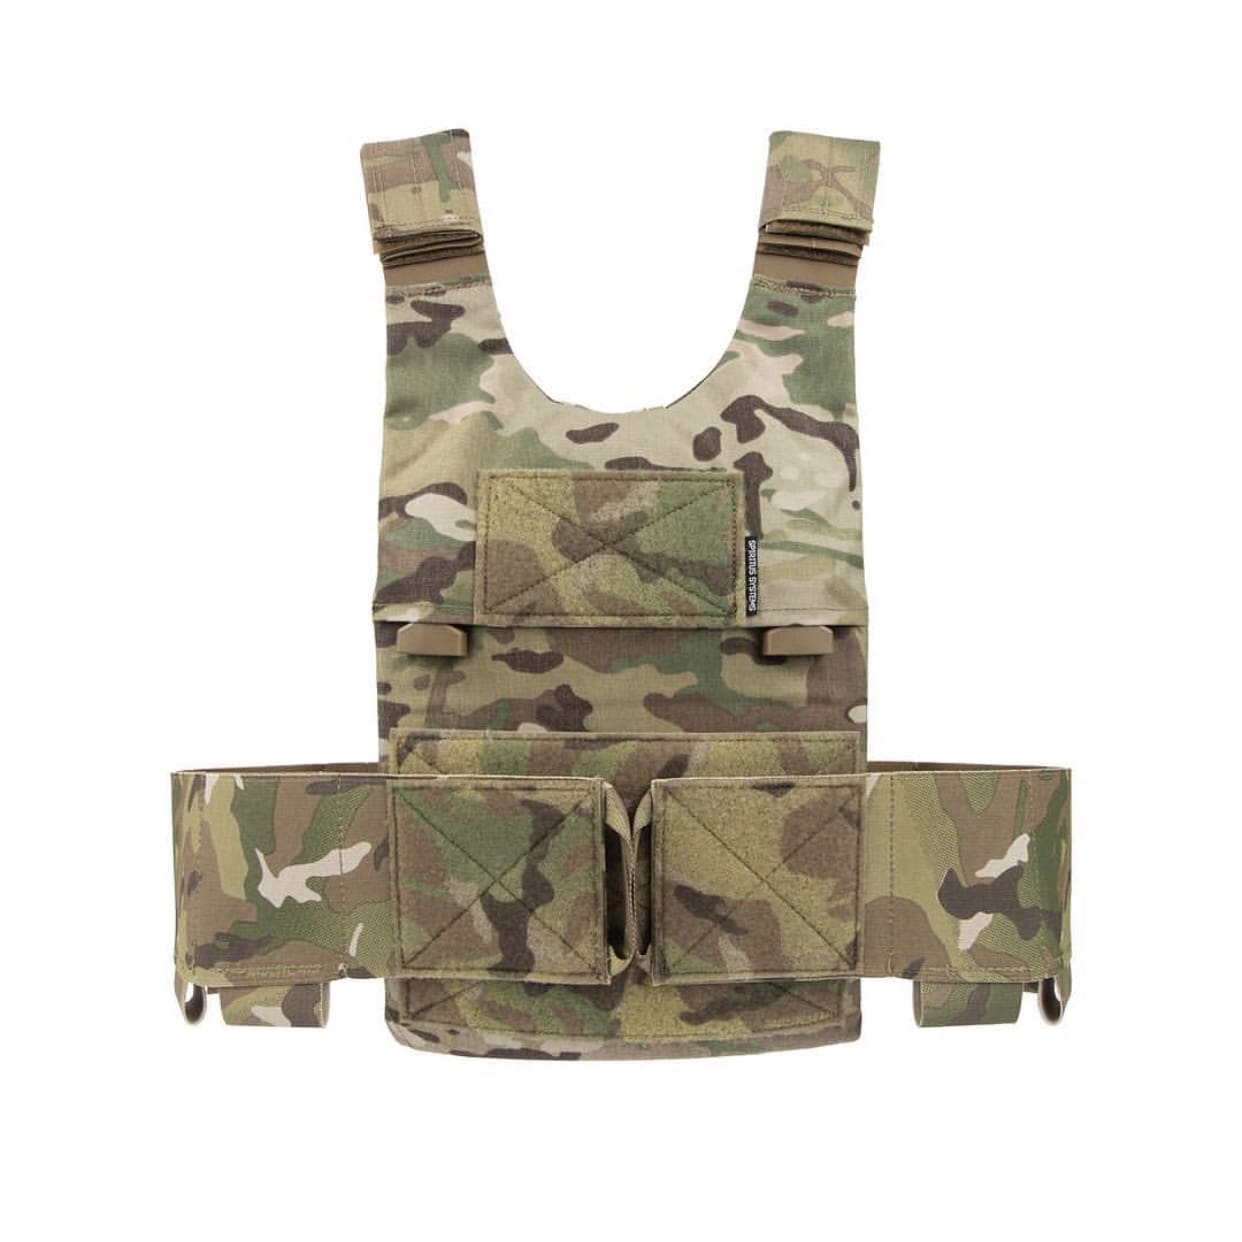 Spiritus Systems – LV/119 Plate Carrier System - Soldier Systems Daily